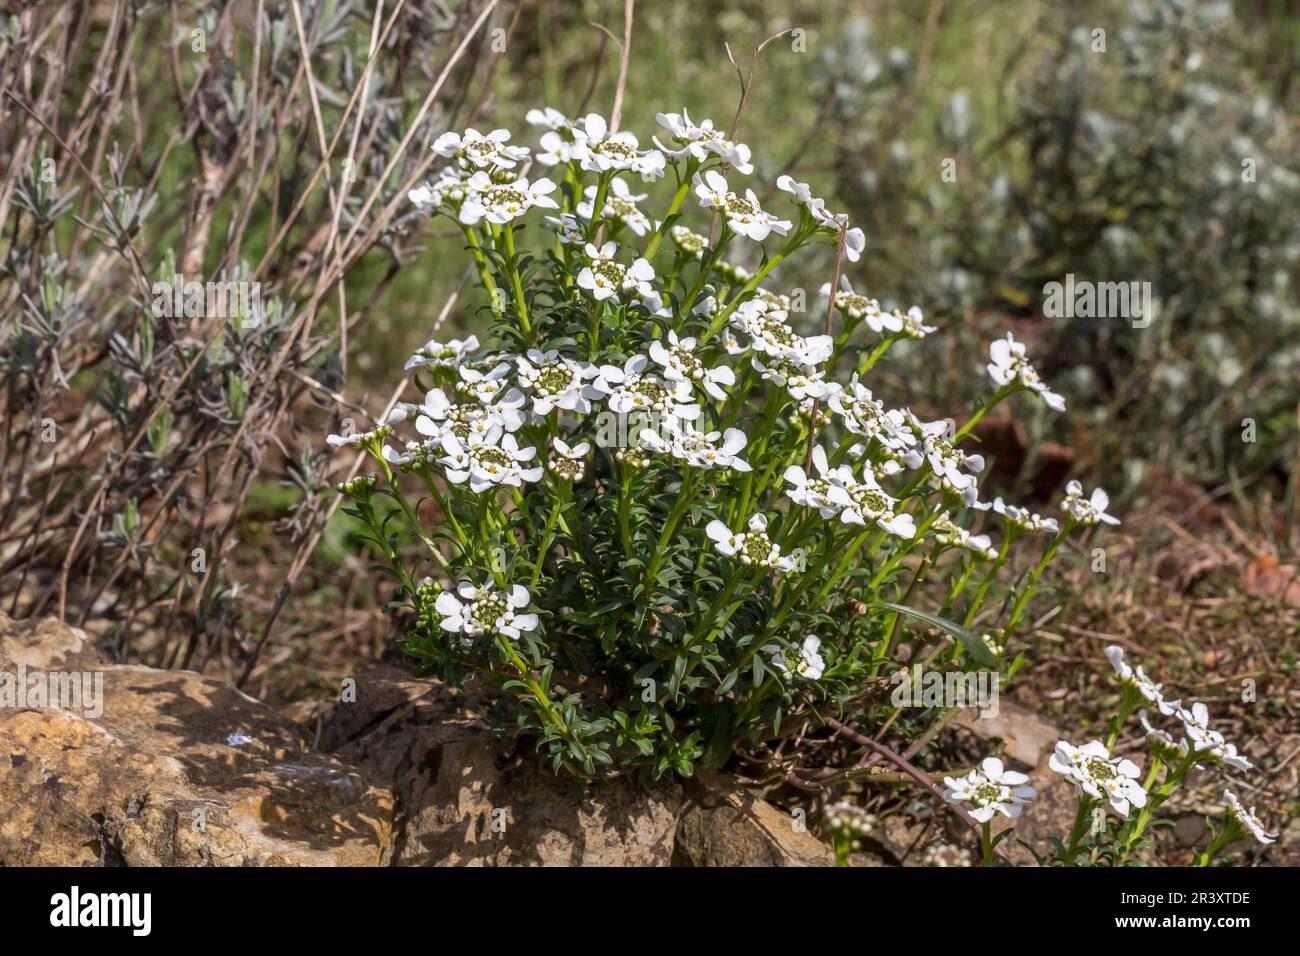 Iberis sempervirens, known as Candytuft, Evergreen candytuft, Perennial candytuft, Candy mustard Stock Photo